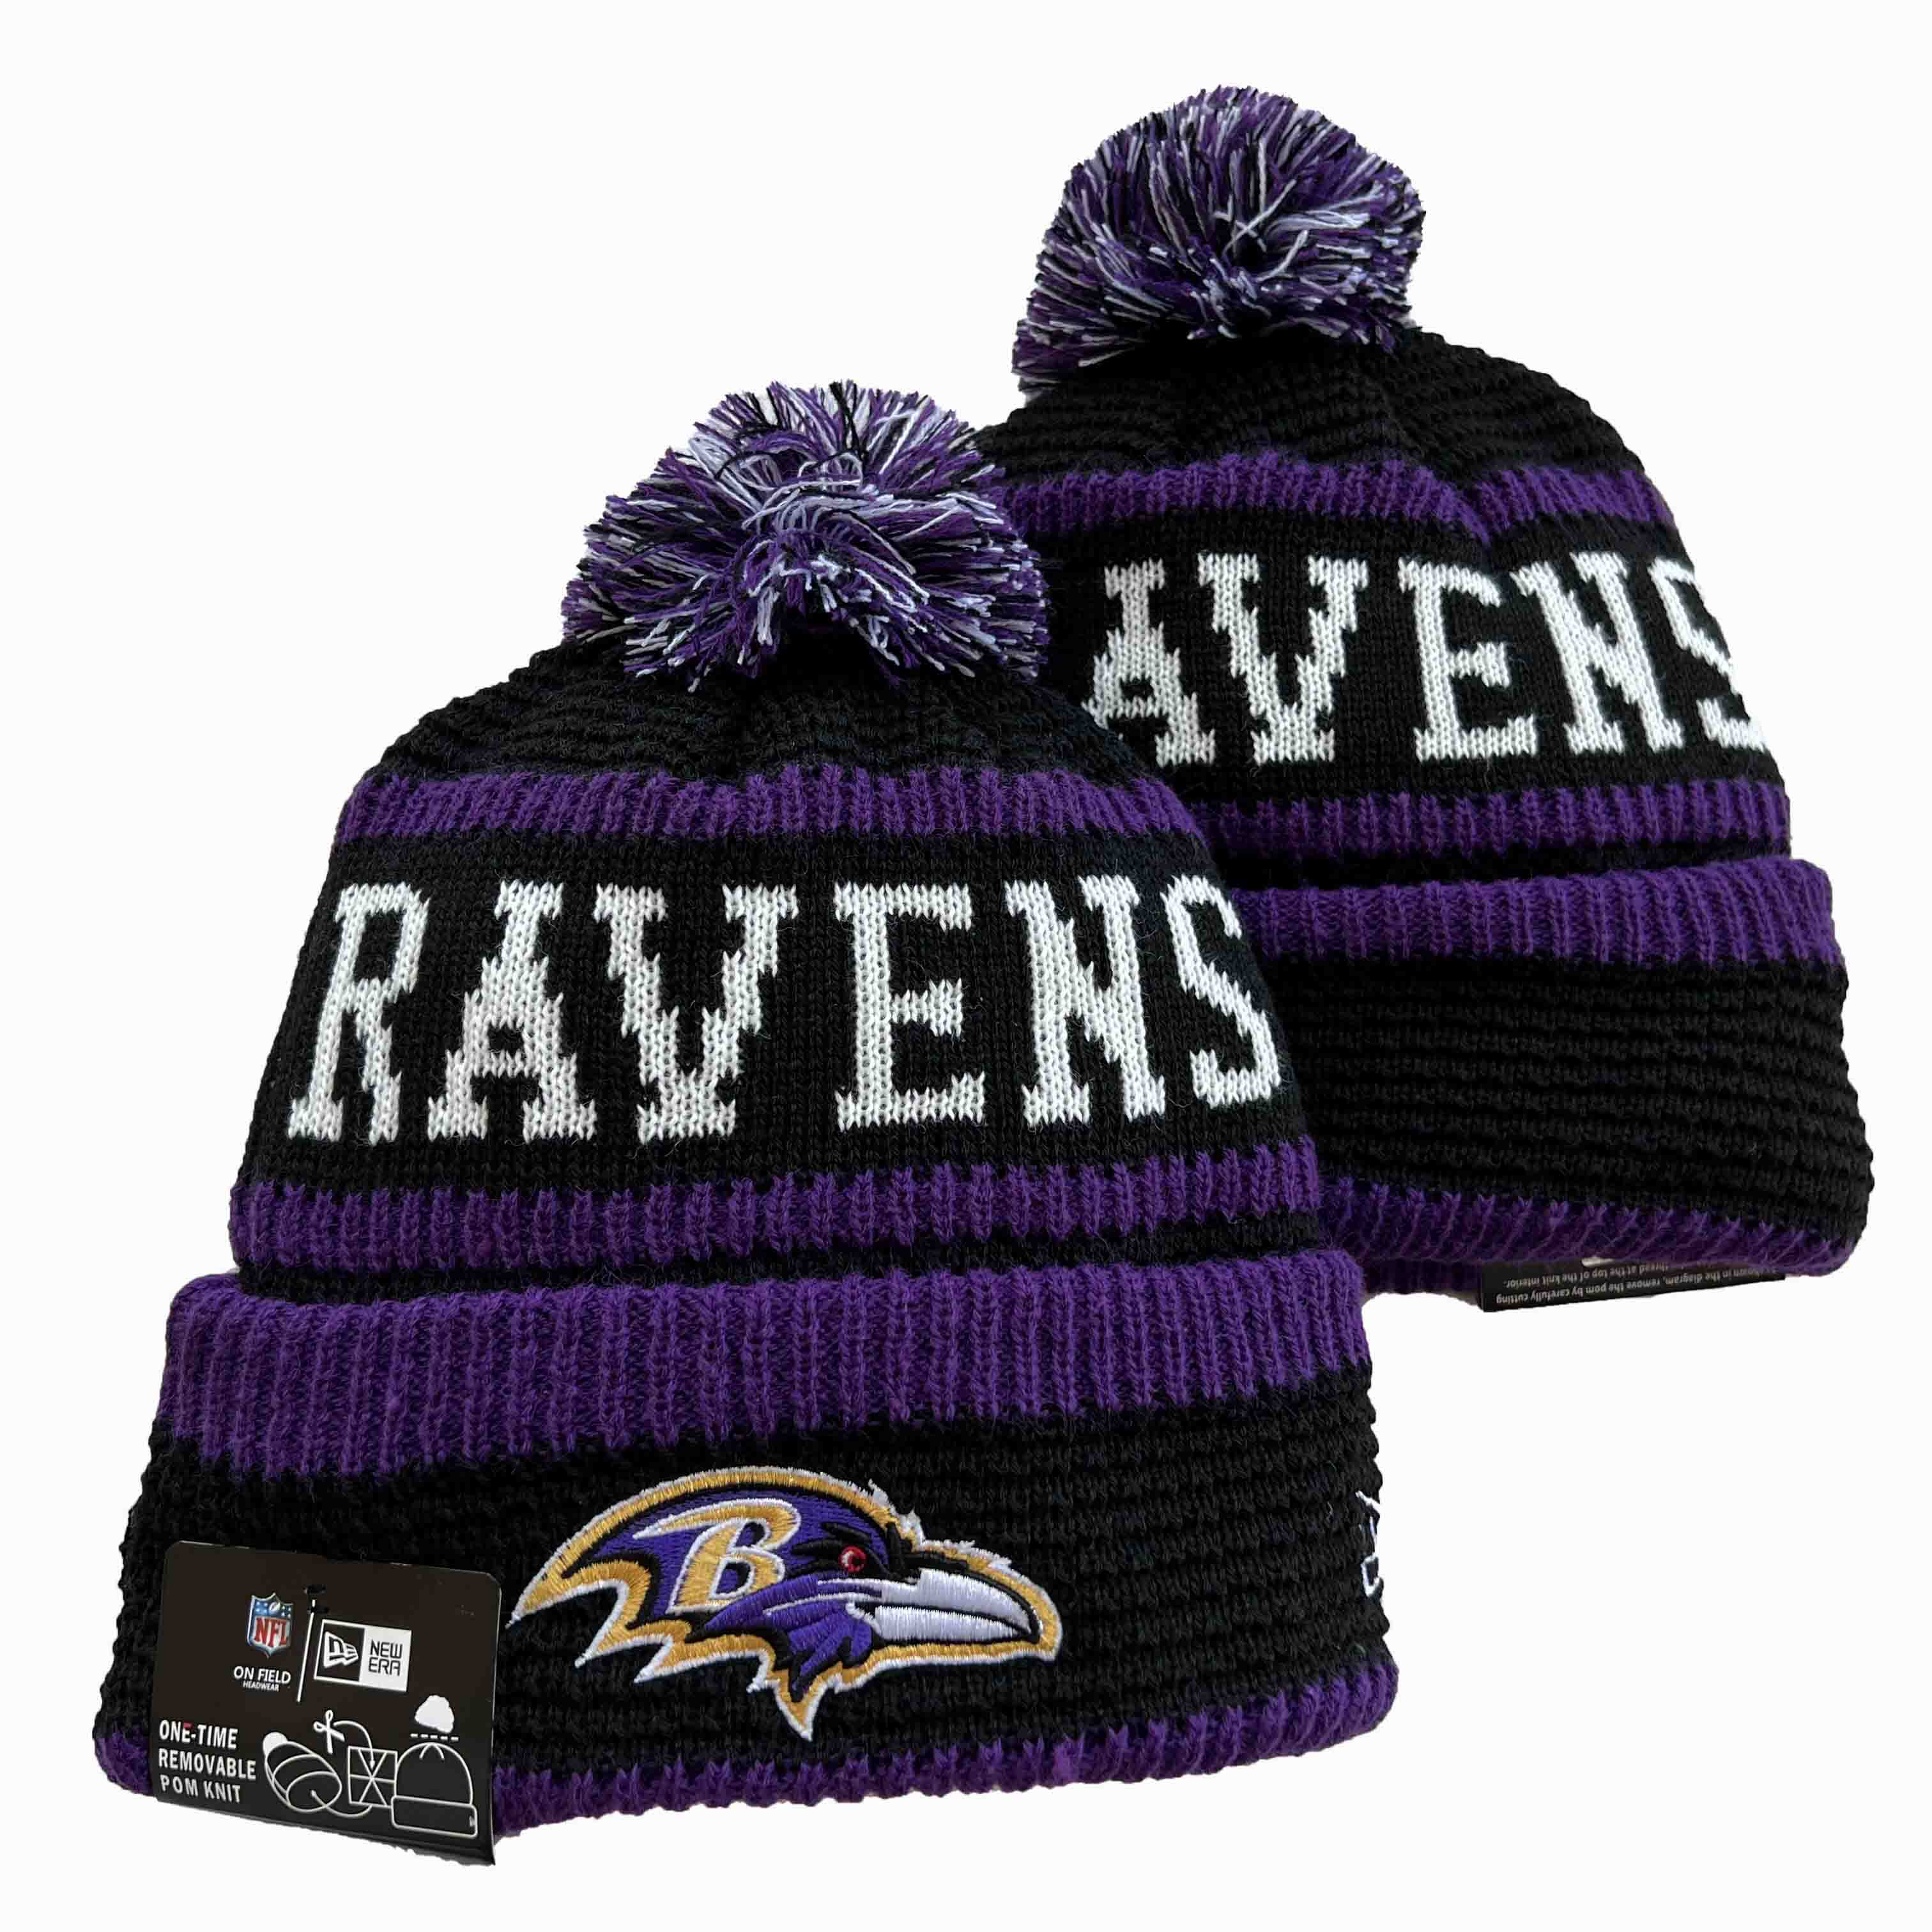 NFL Baltimore Ravens Beanies Knit Hats-YD1189